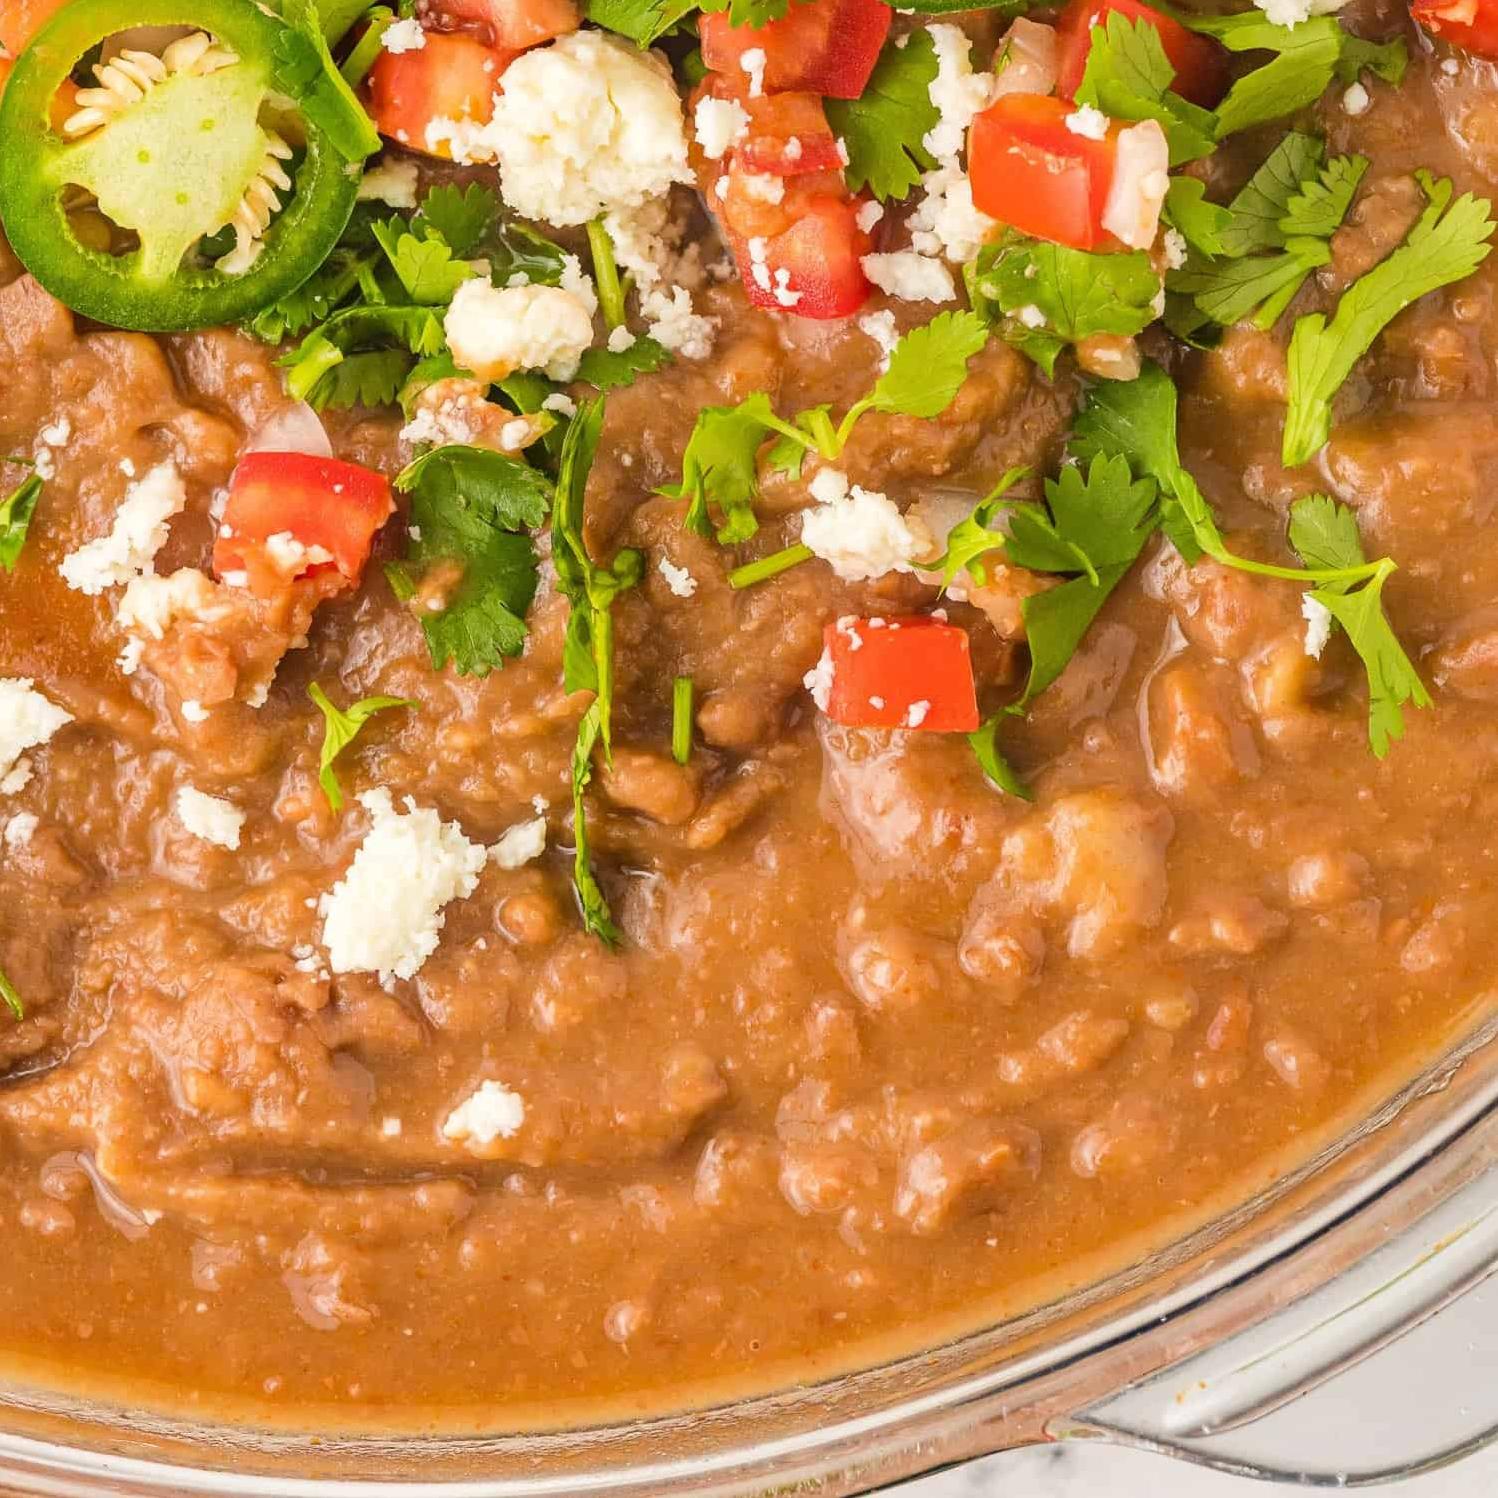  Add some spice to your life with these Refried Beans